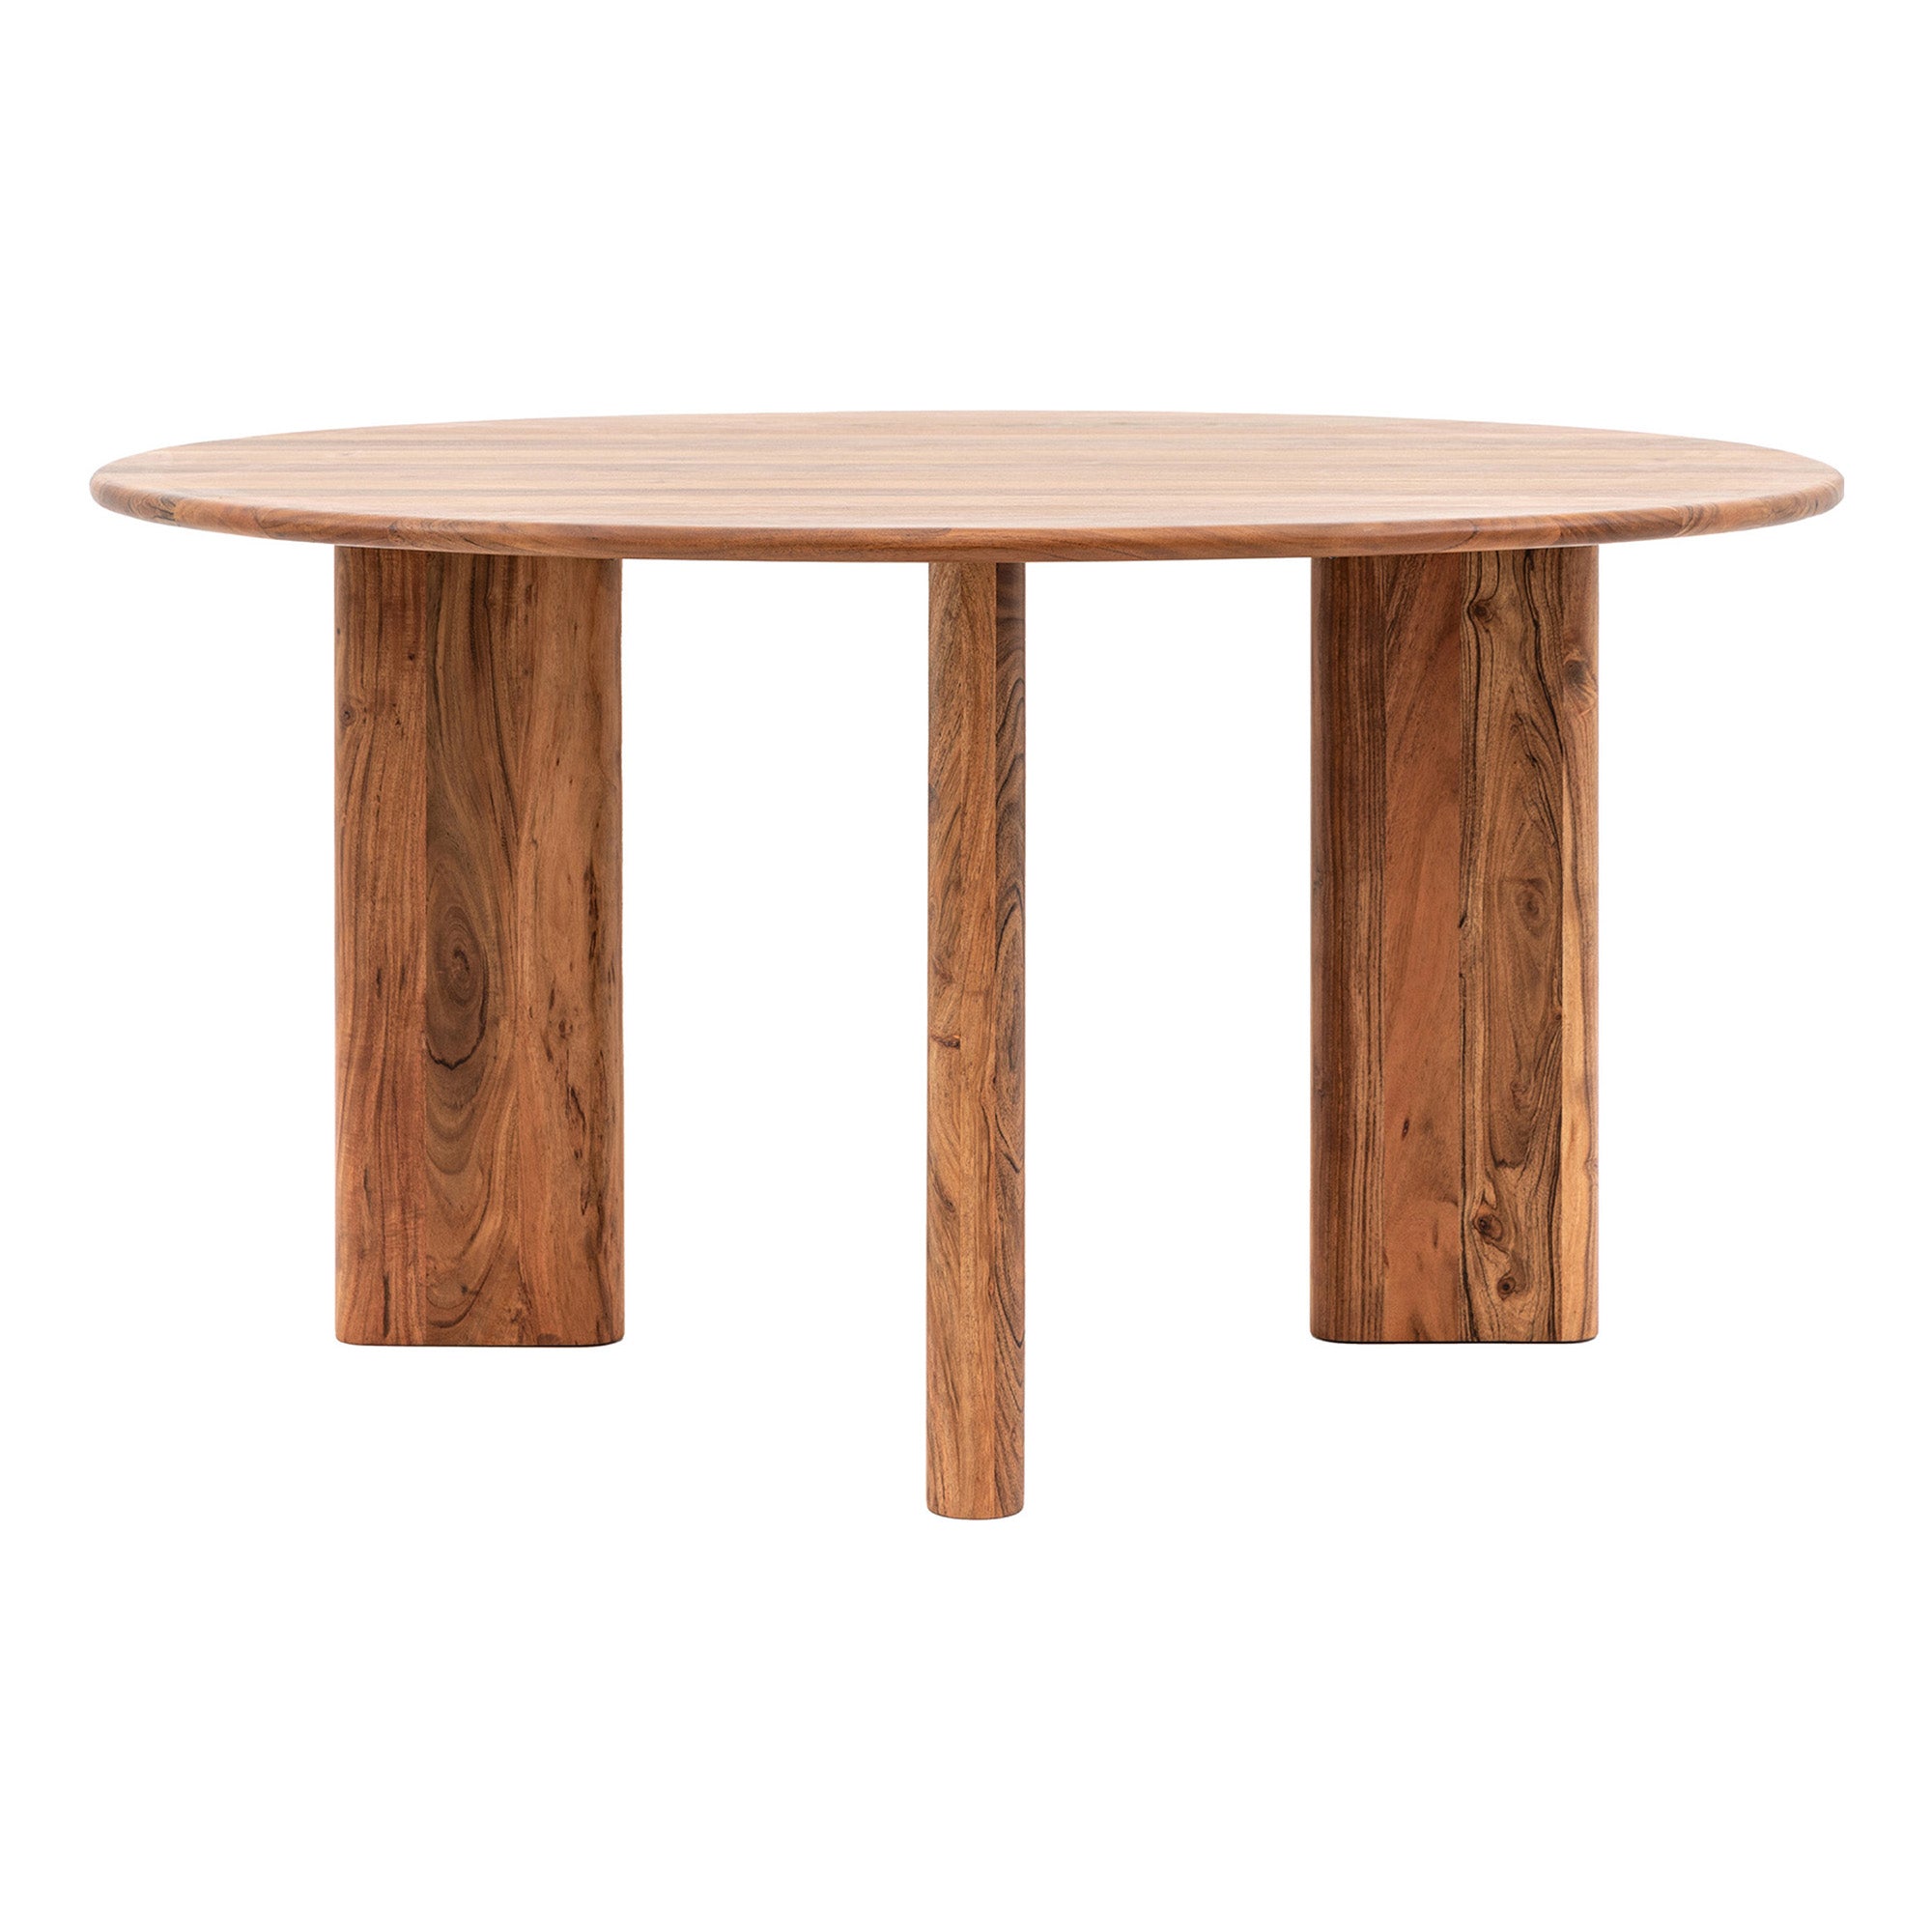 The Contemporary Round Dining Table